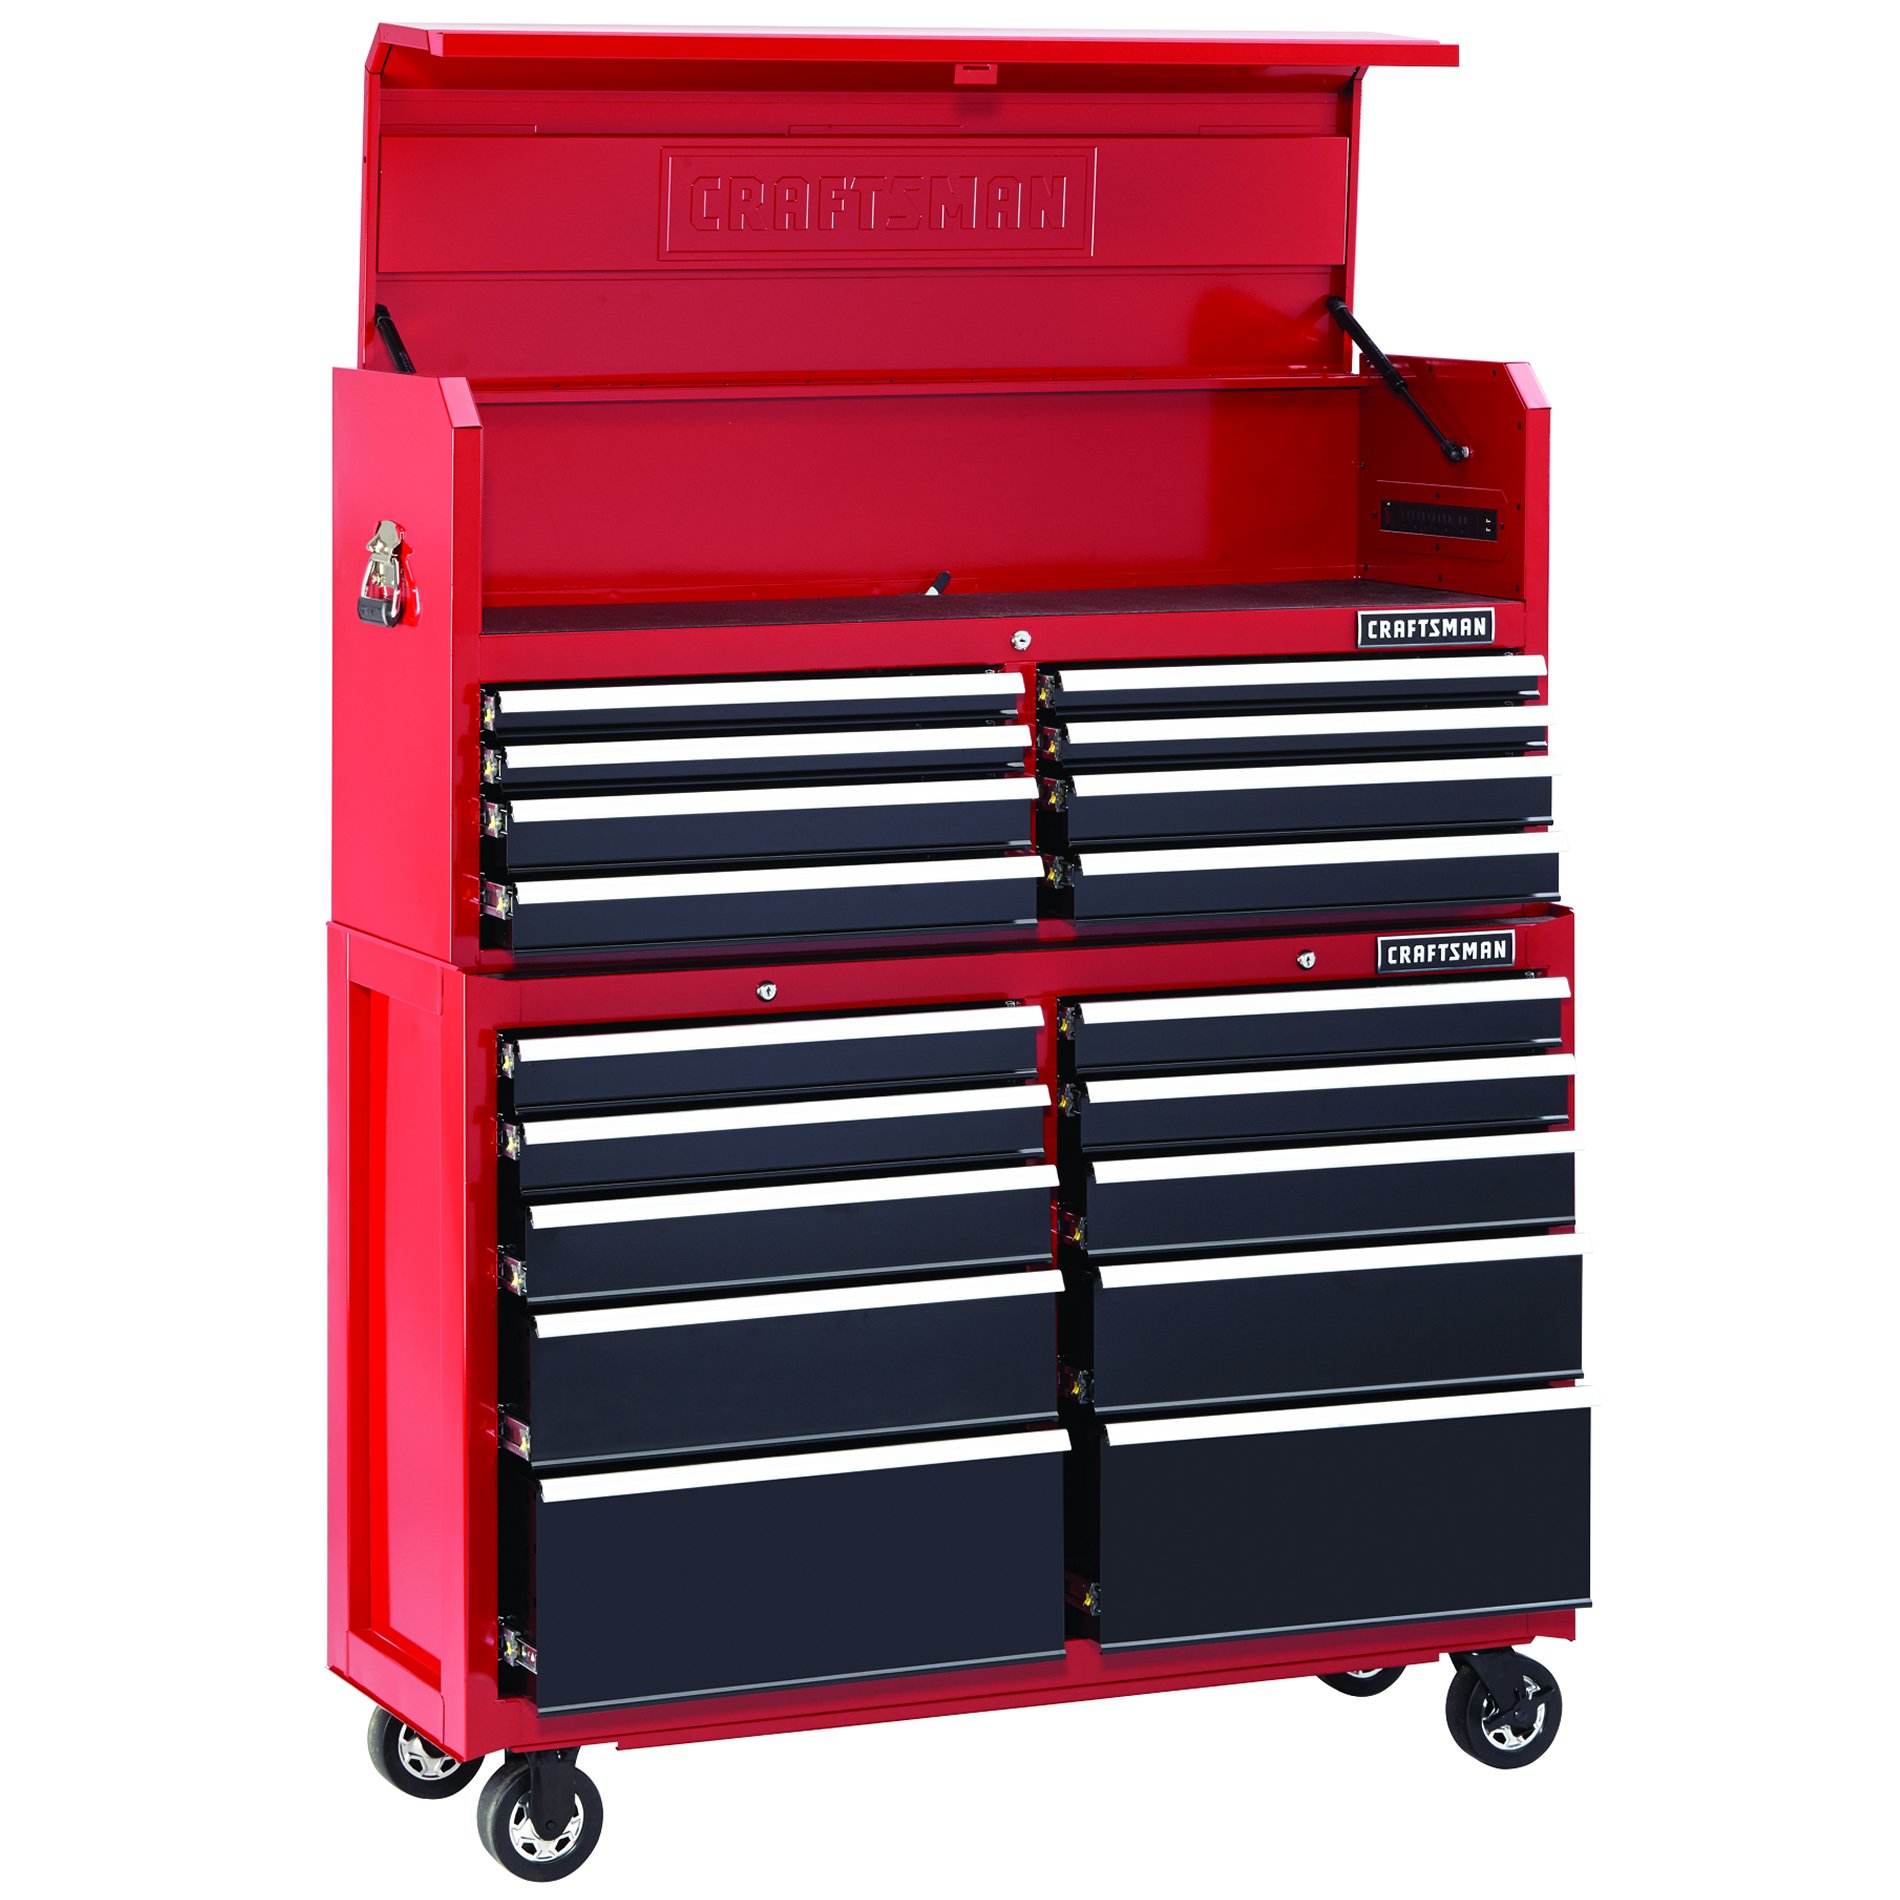 Craftsman 52" Wide 18Drawer Soft Close Tool Chest and Rolling